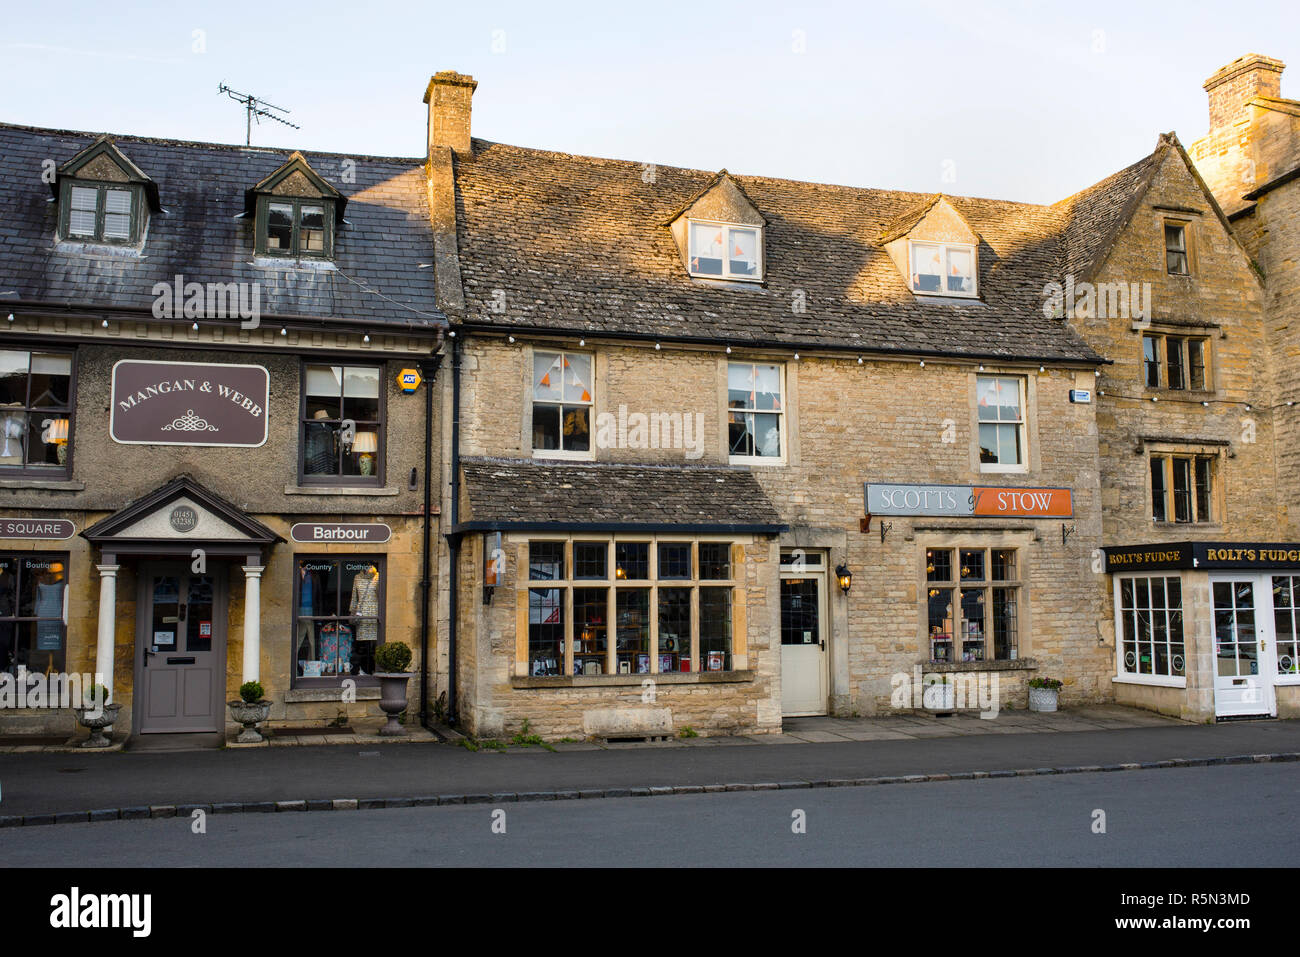 Stow-on-the-Wold honey colored stone market town in The Cotswolds, England. Stock Photo